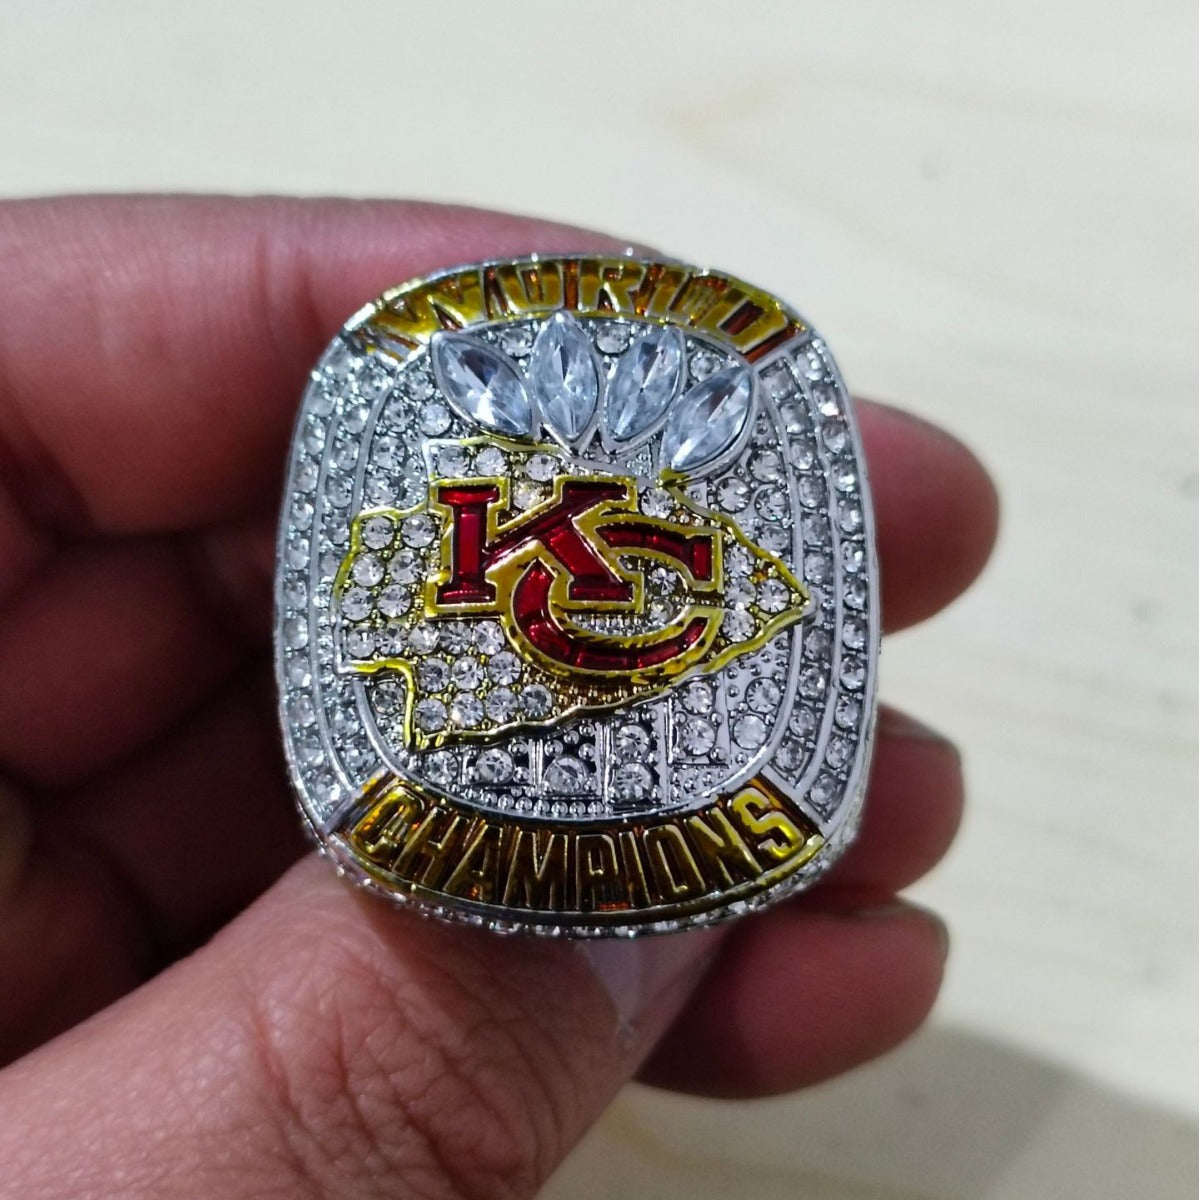 Football championship rings - NFL championship rings | Keychain & Enamel  Pins Promotional Products Manufacturer | Jin Sheu